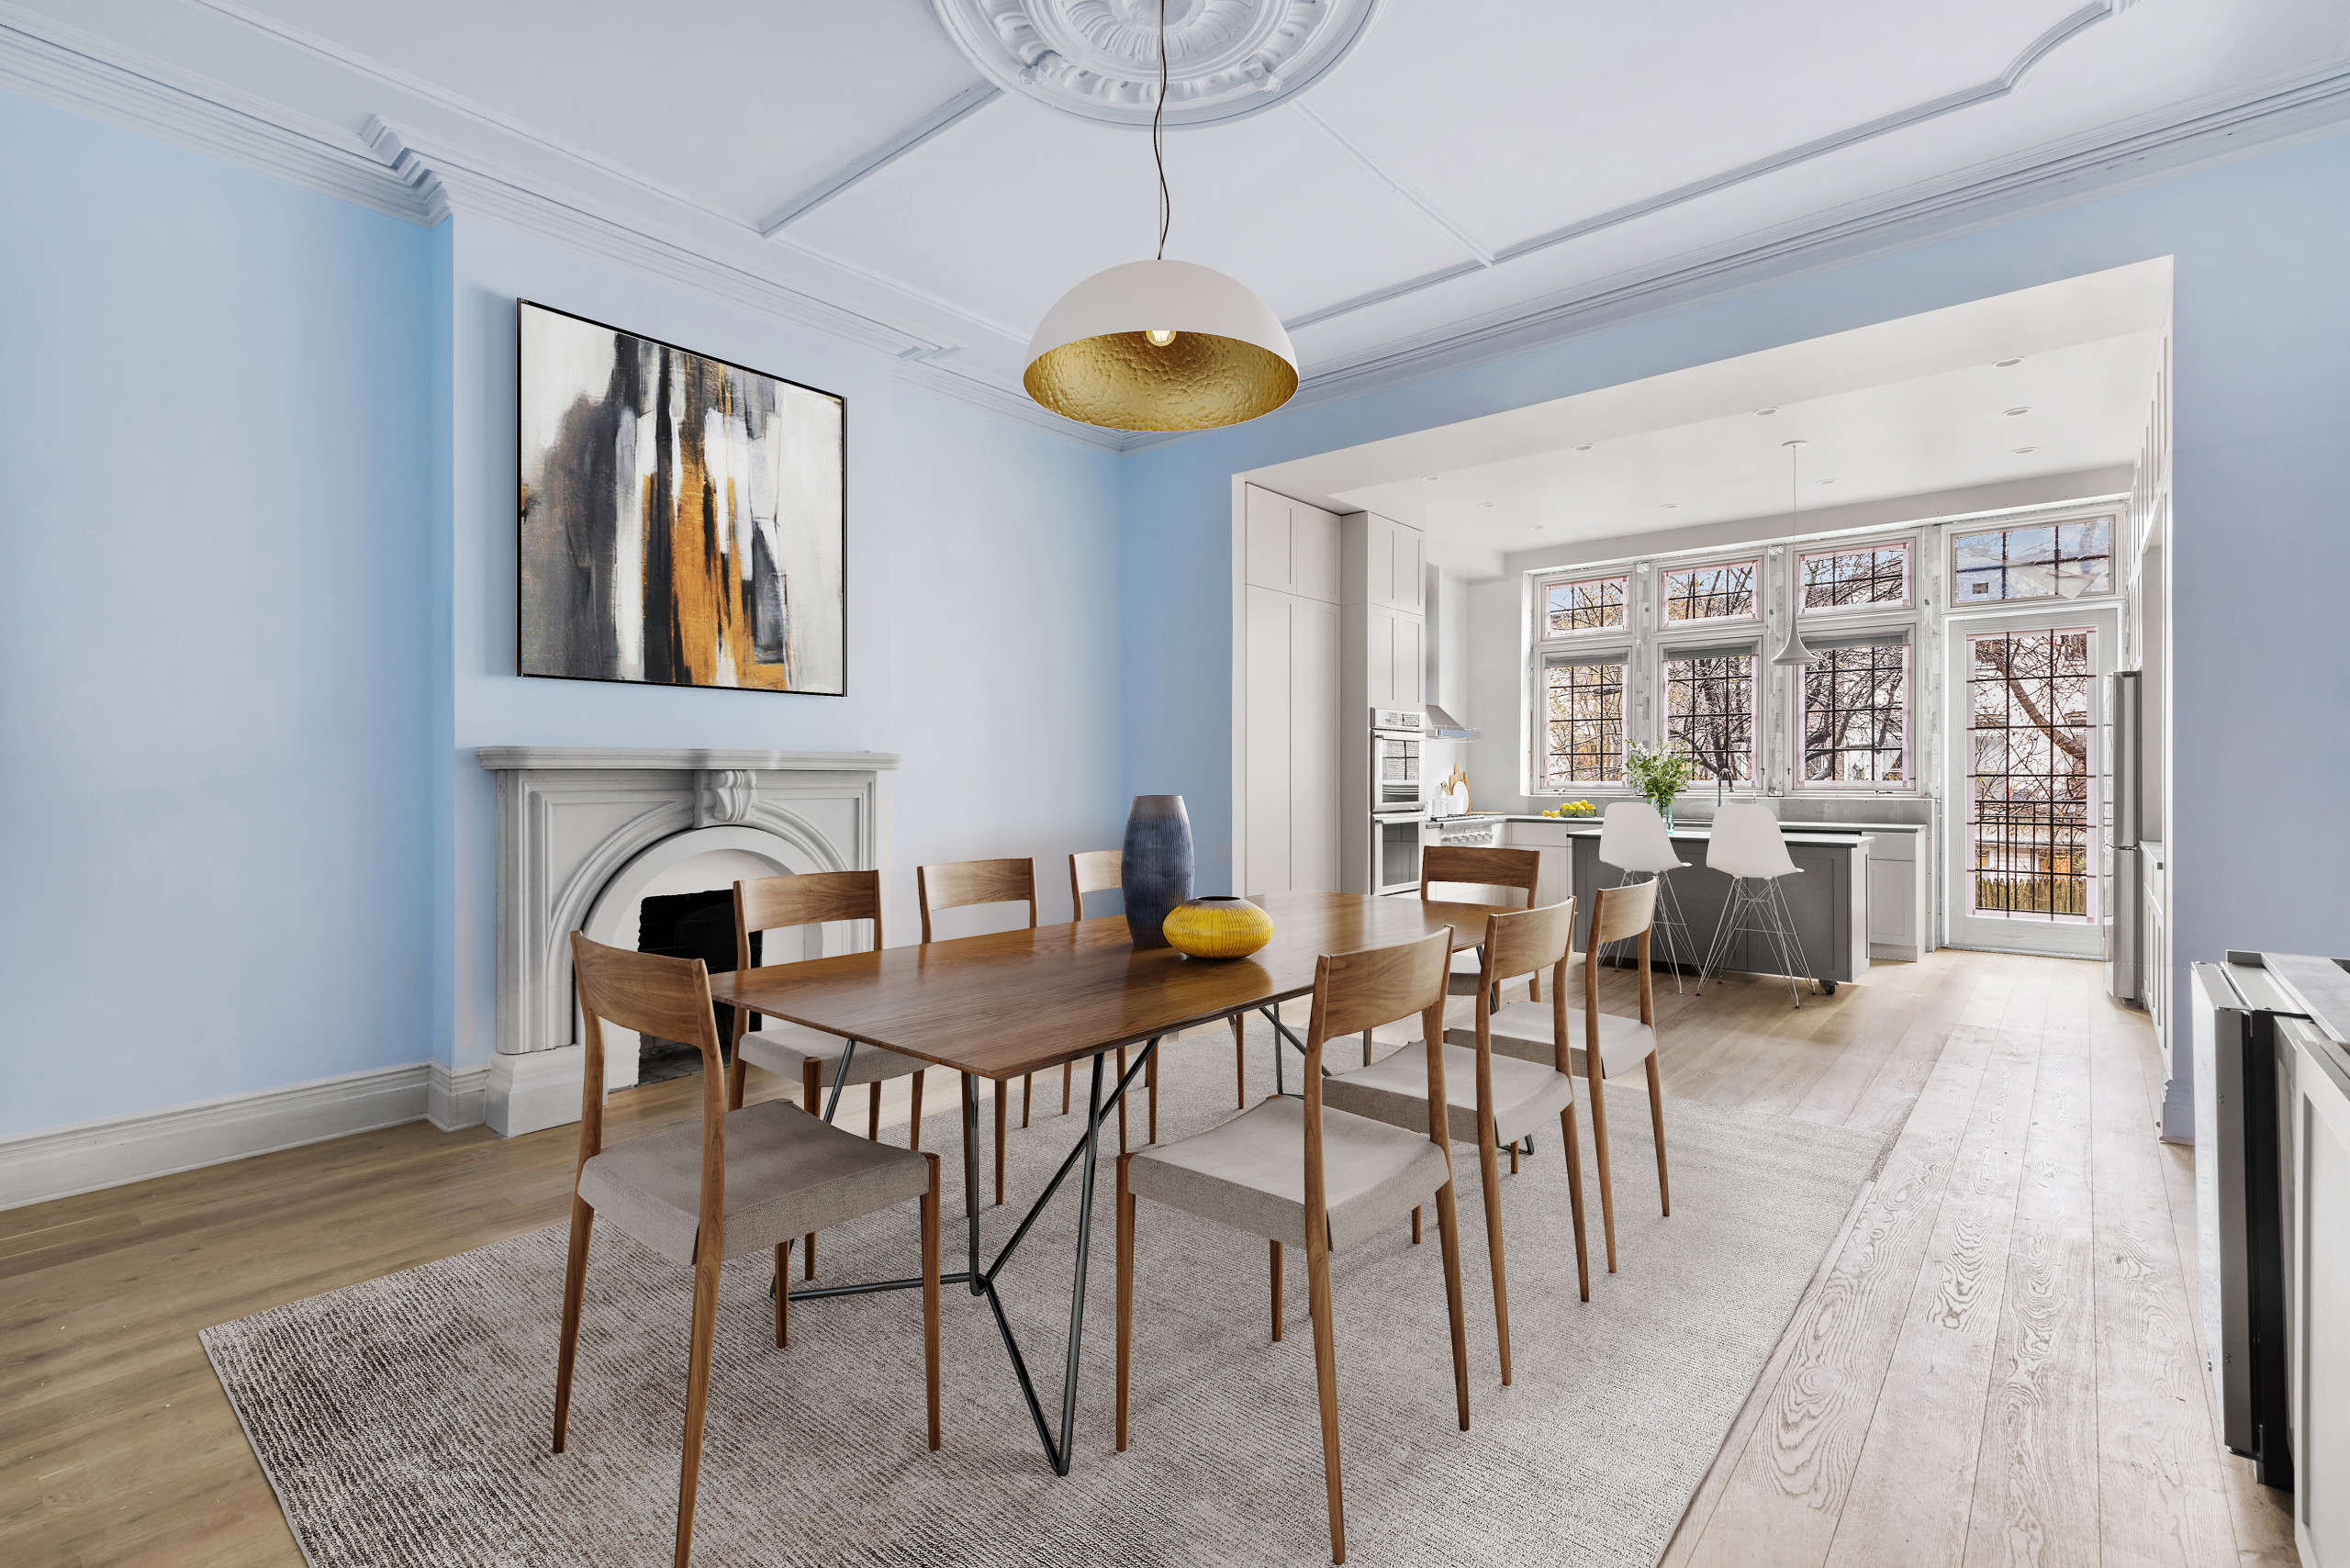 75 Beautiful Dining Room With Blue Walls Pictures Ideas February 2021 Houzz